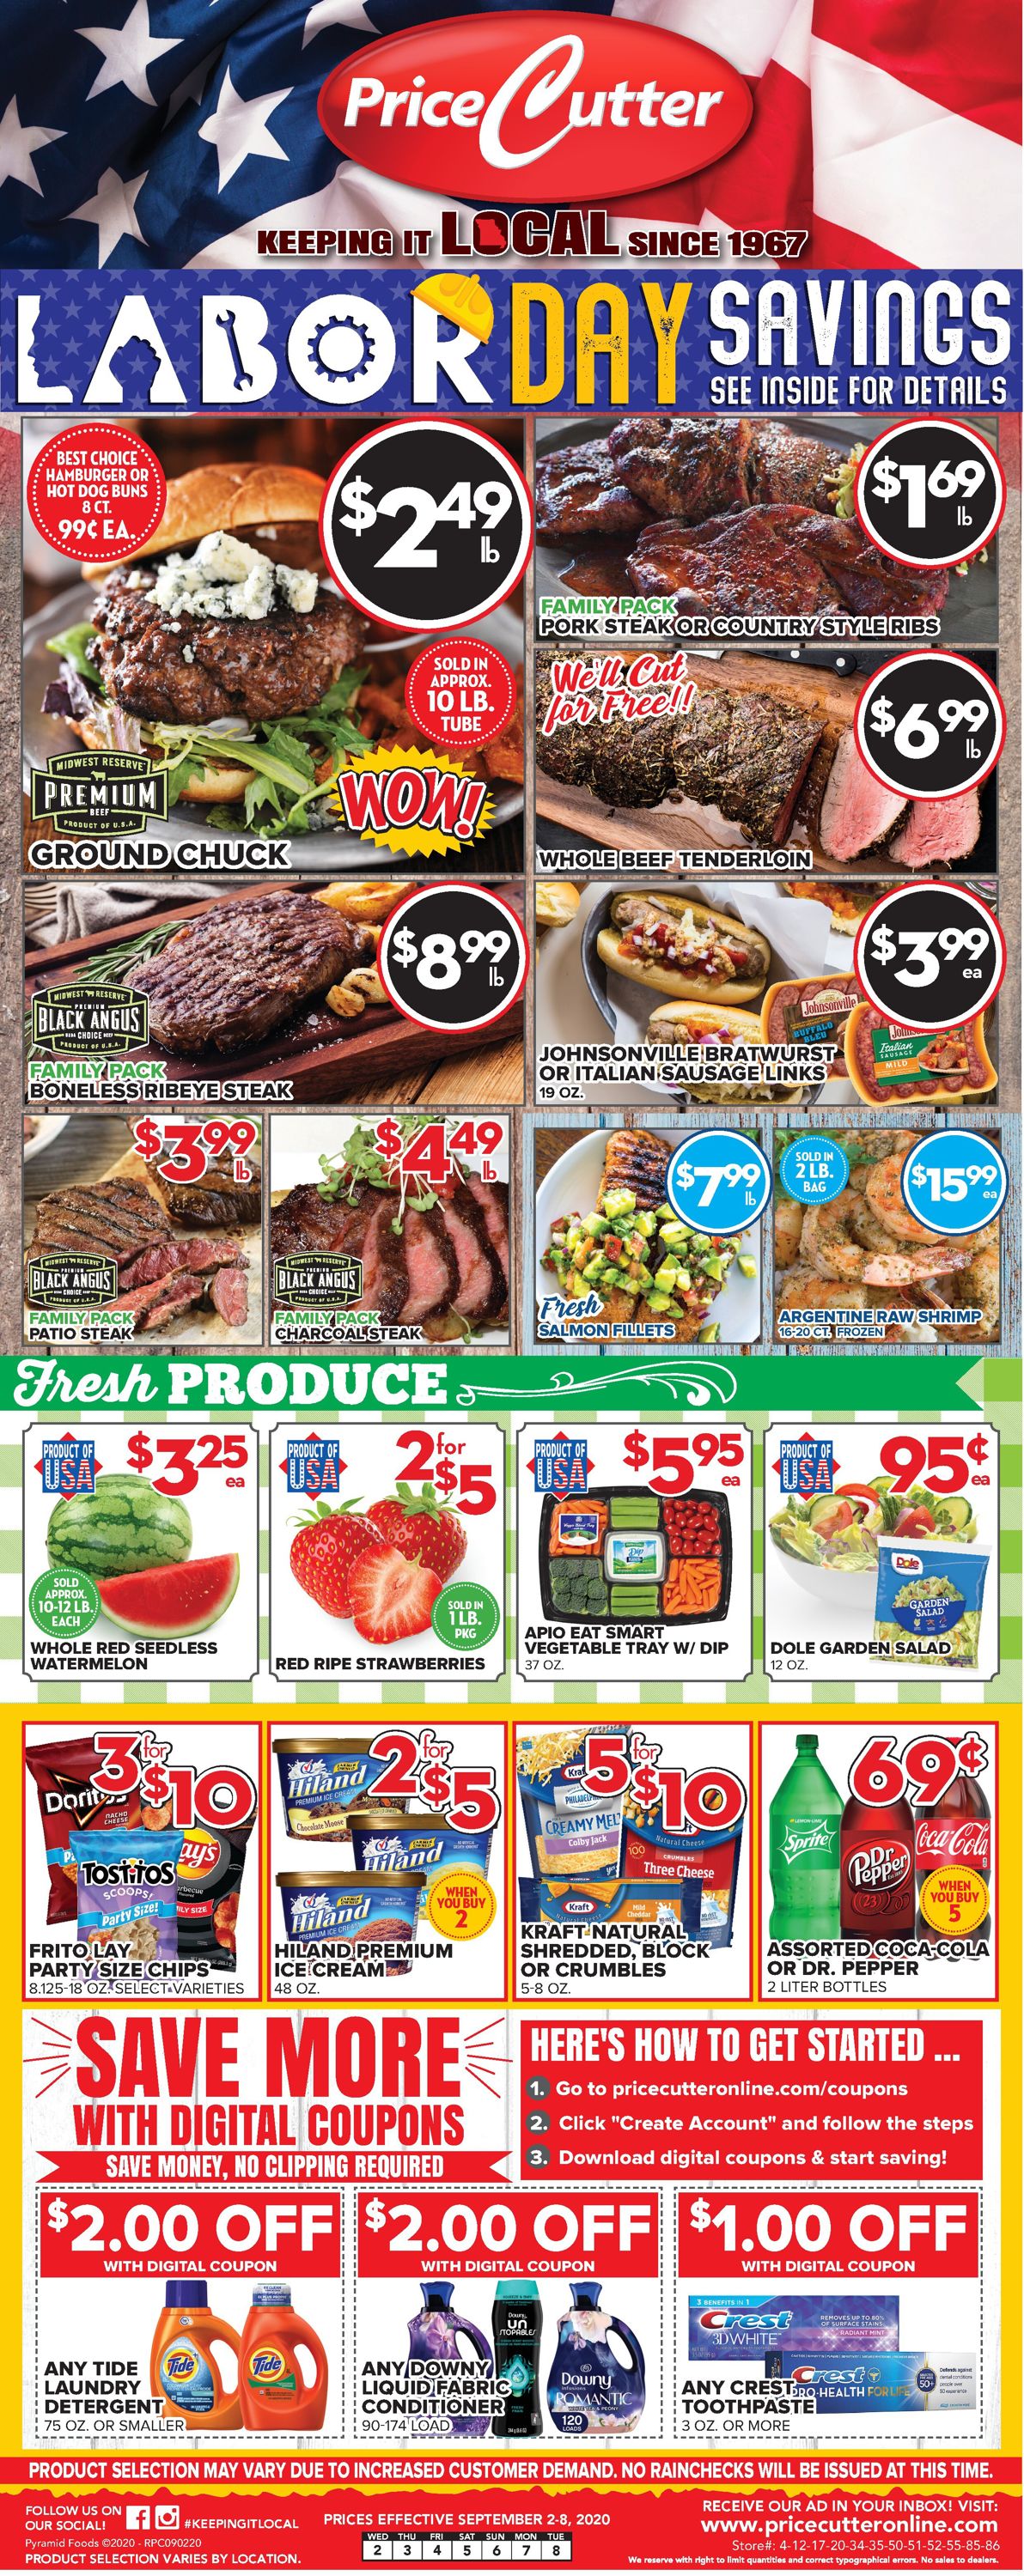 Price Cutter Weekly Ad Circular - valid 09/02-09/08/2020